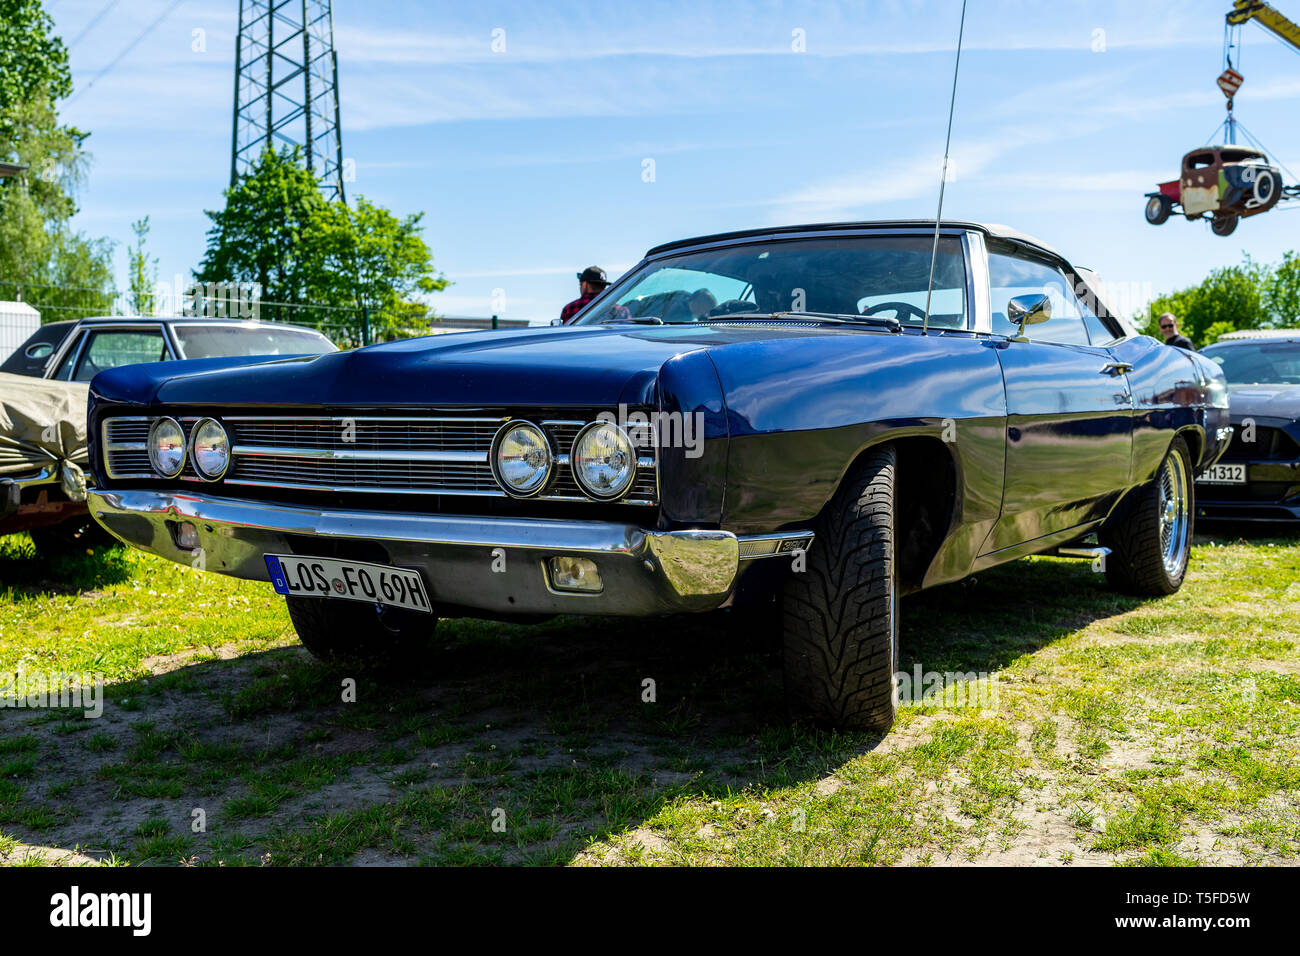 BERLIN - 05 MAI 2018 : berline Ford Galaxie 500. Banque D'Images